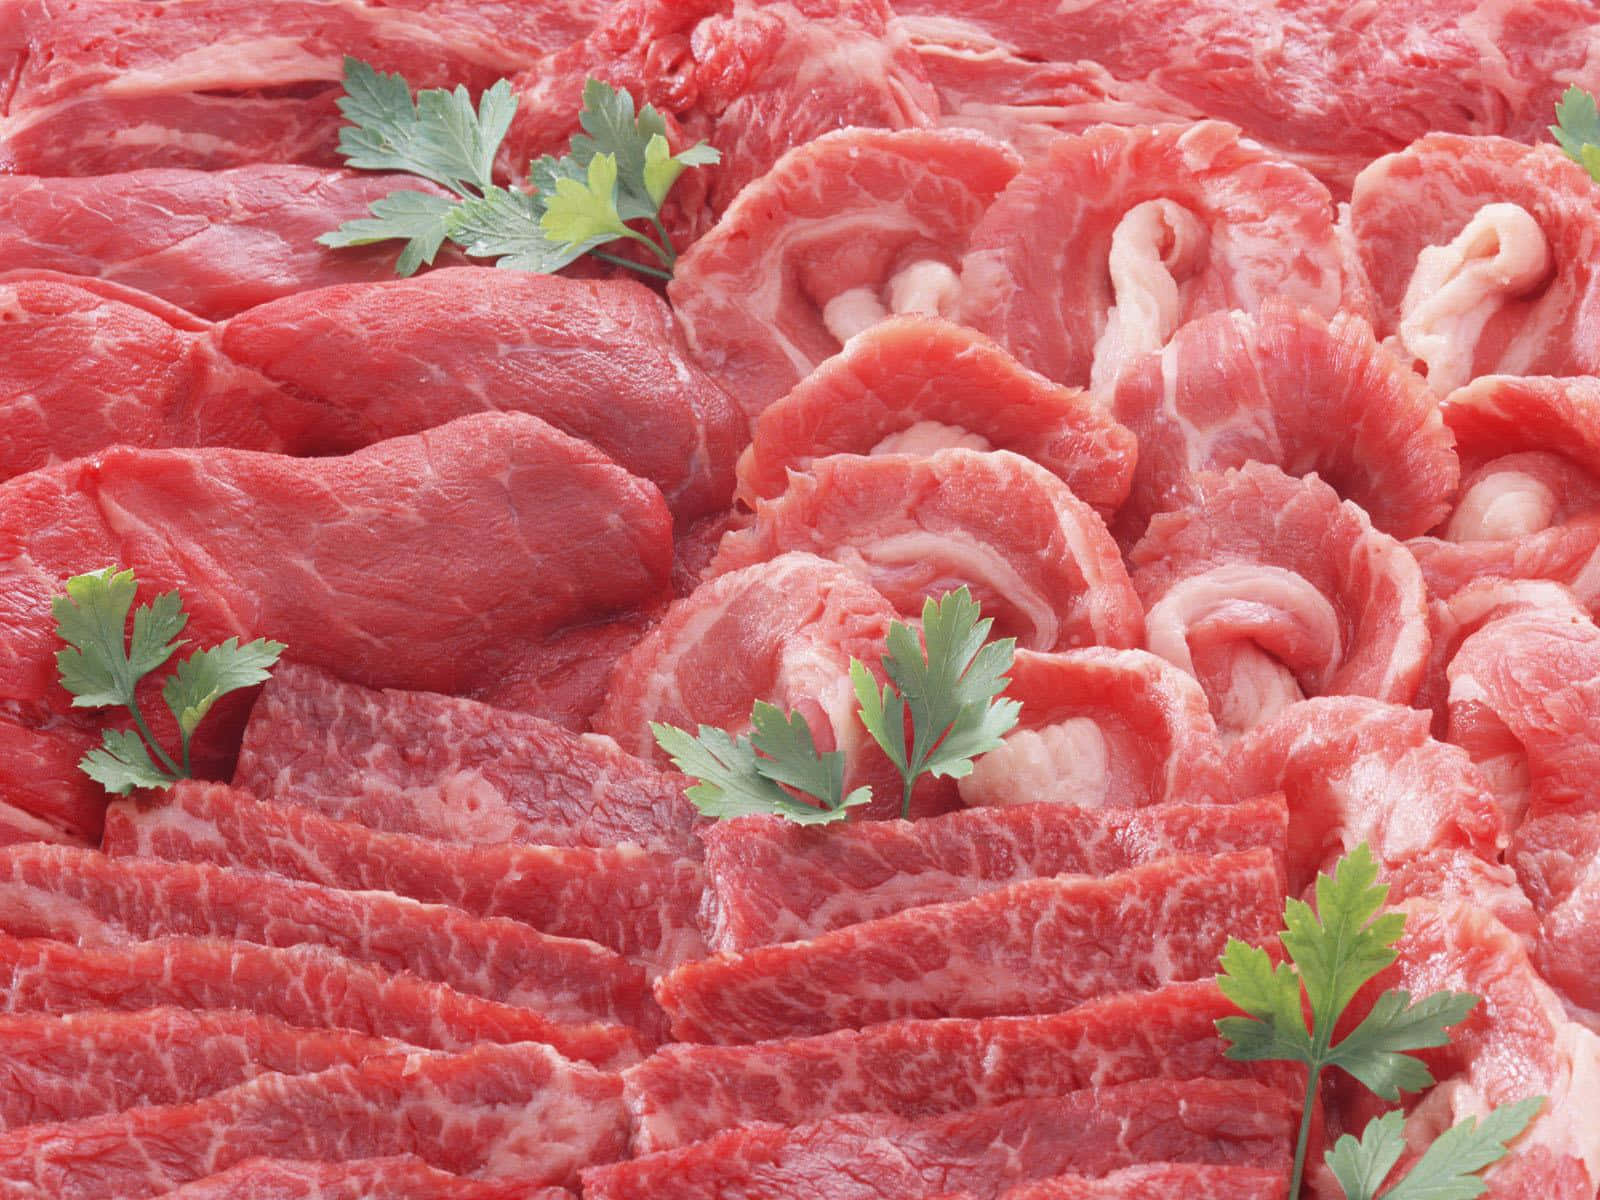 A Close Up Of A Piece Of Meat